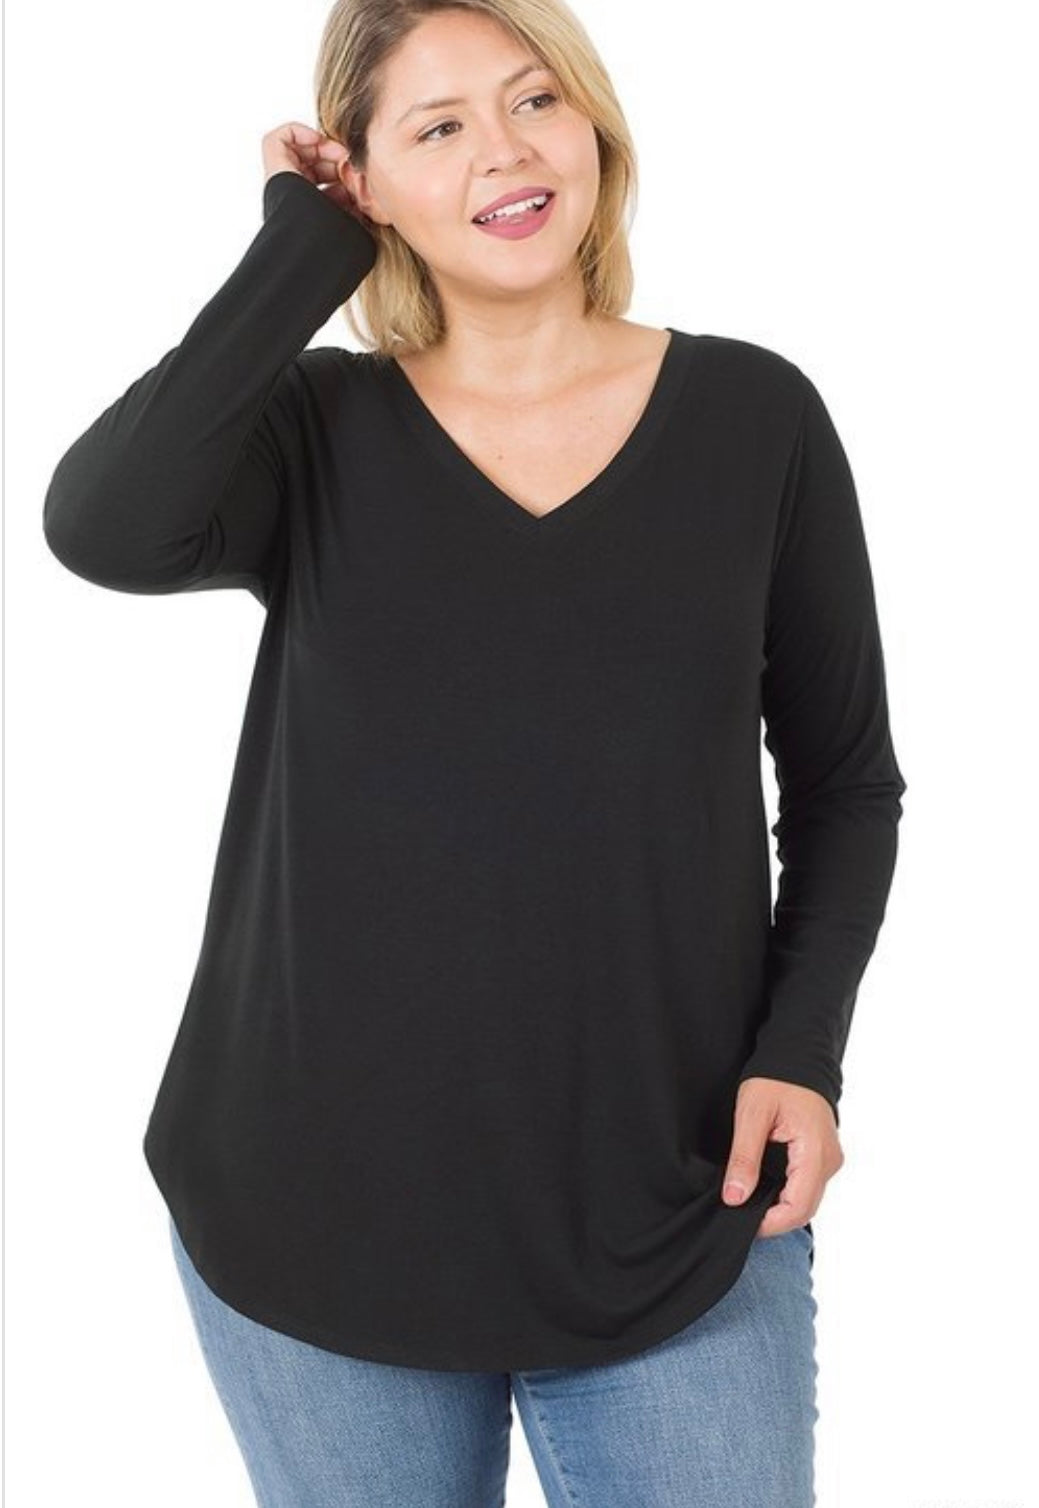 Tami V-neck Basic Plus - Corinne Boutique Family Owned and Operated USA